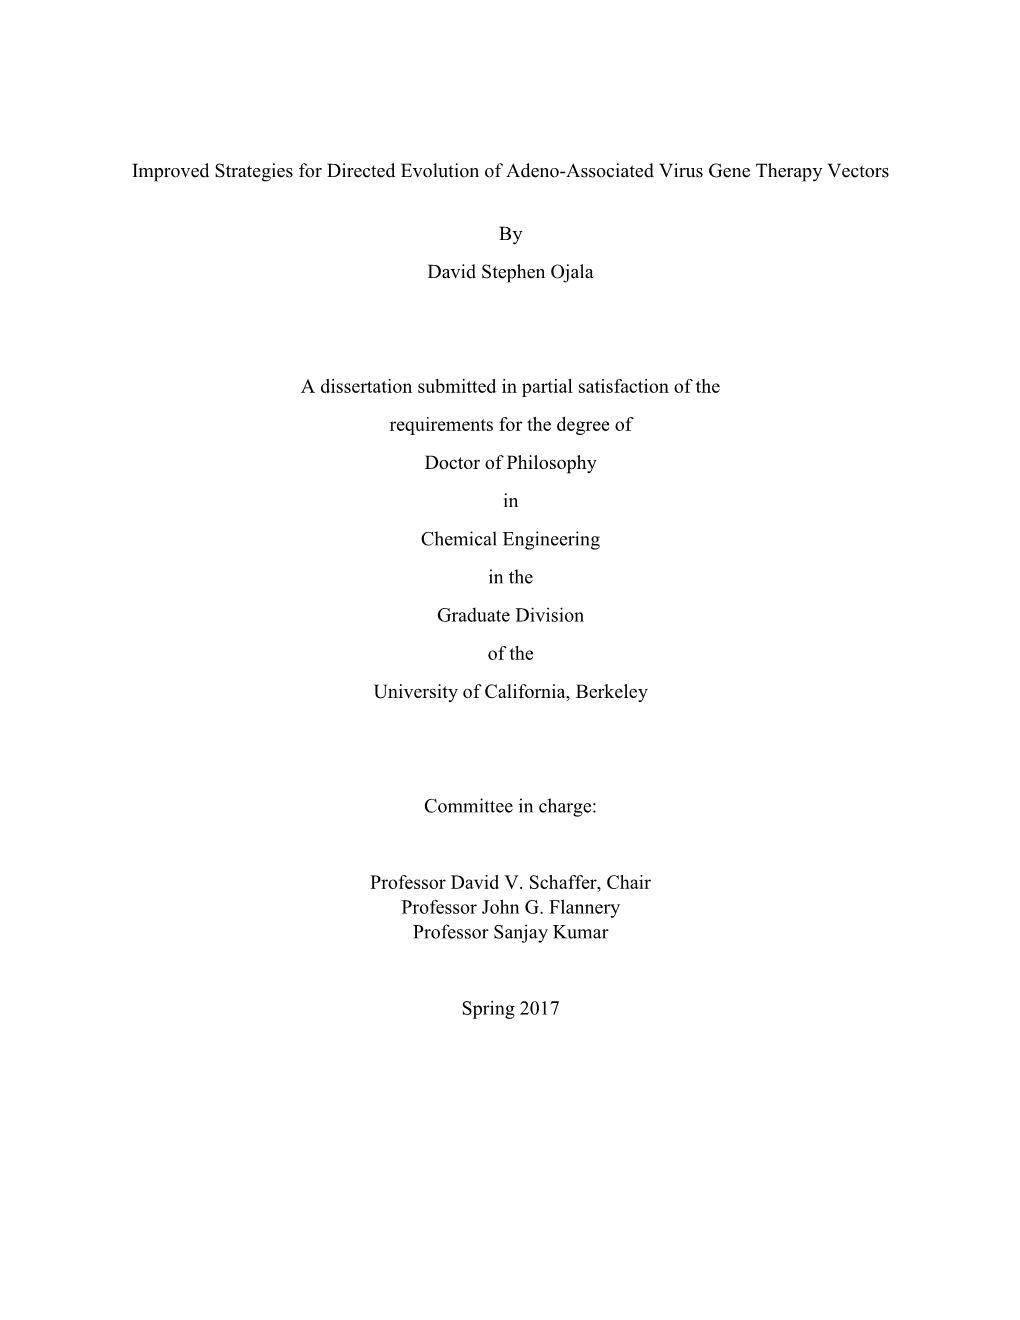 Improved Strategies for Directed Evolution of Adeno-Associated Virus Gene Therapy Vectors by David Stephen Ojala a Dissertation